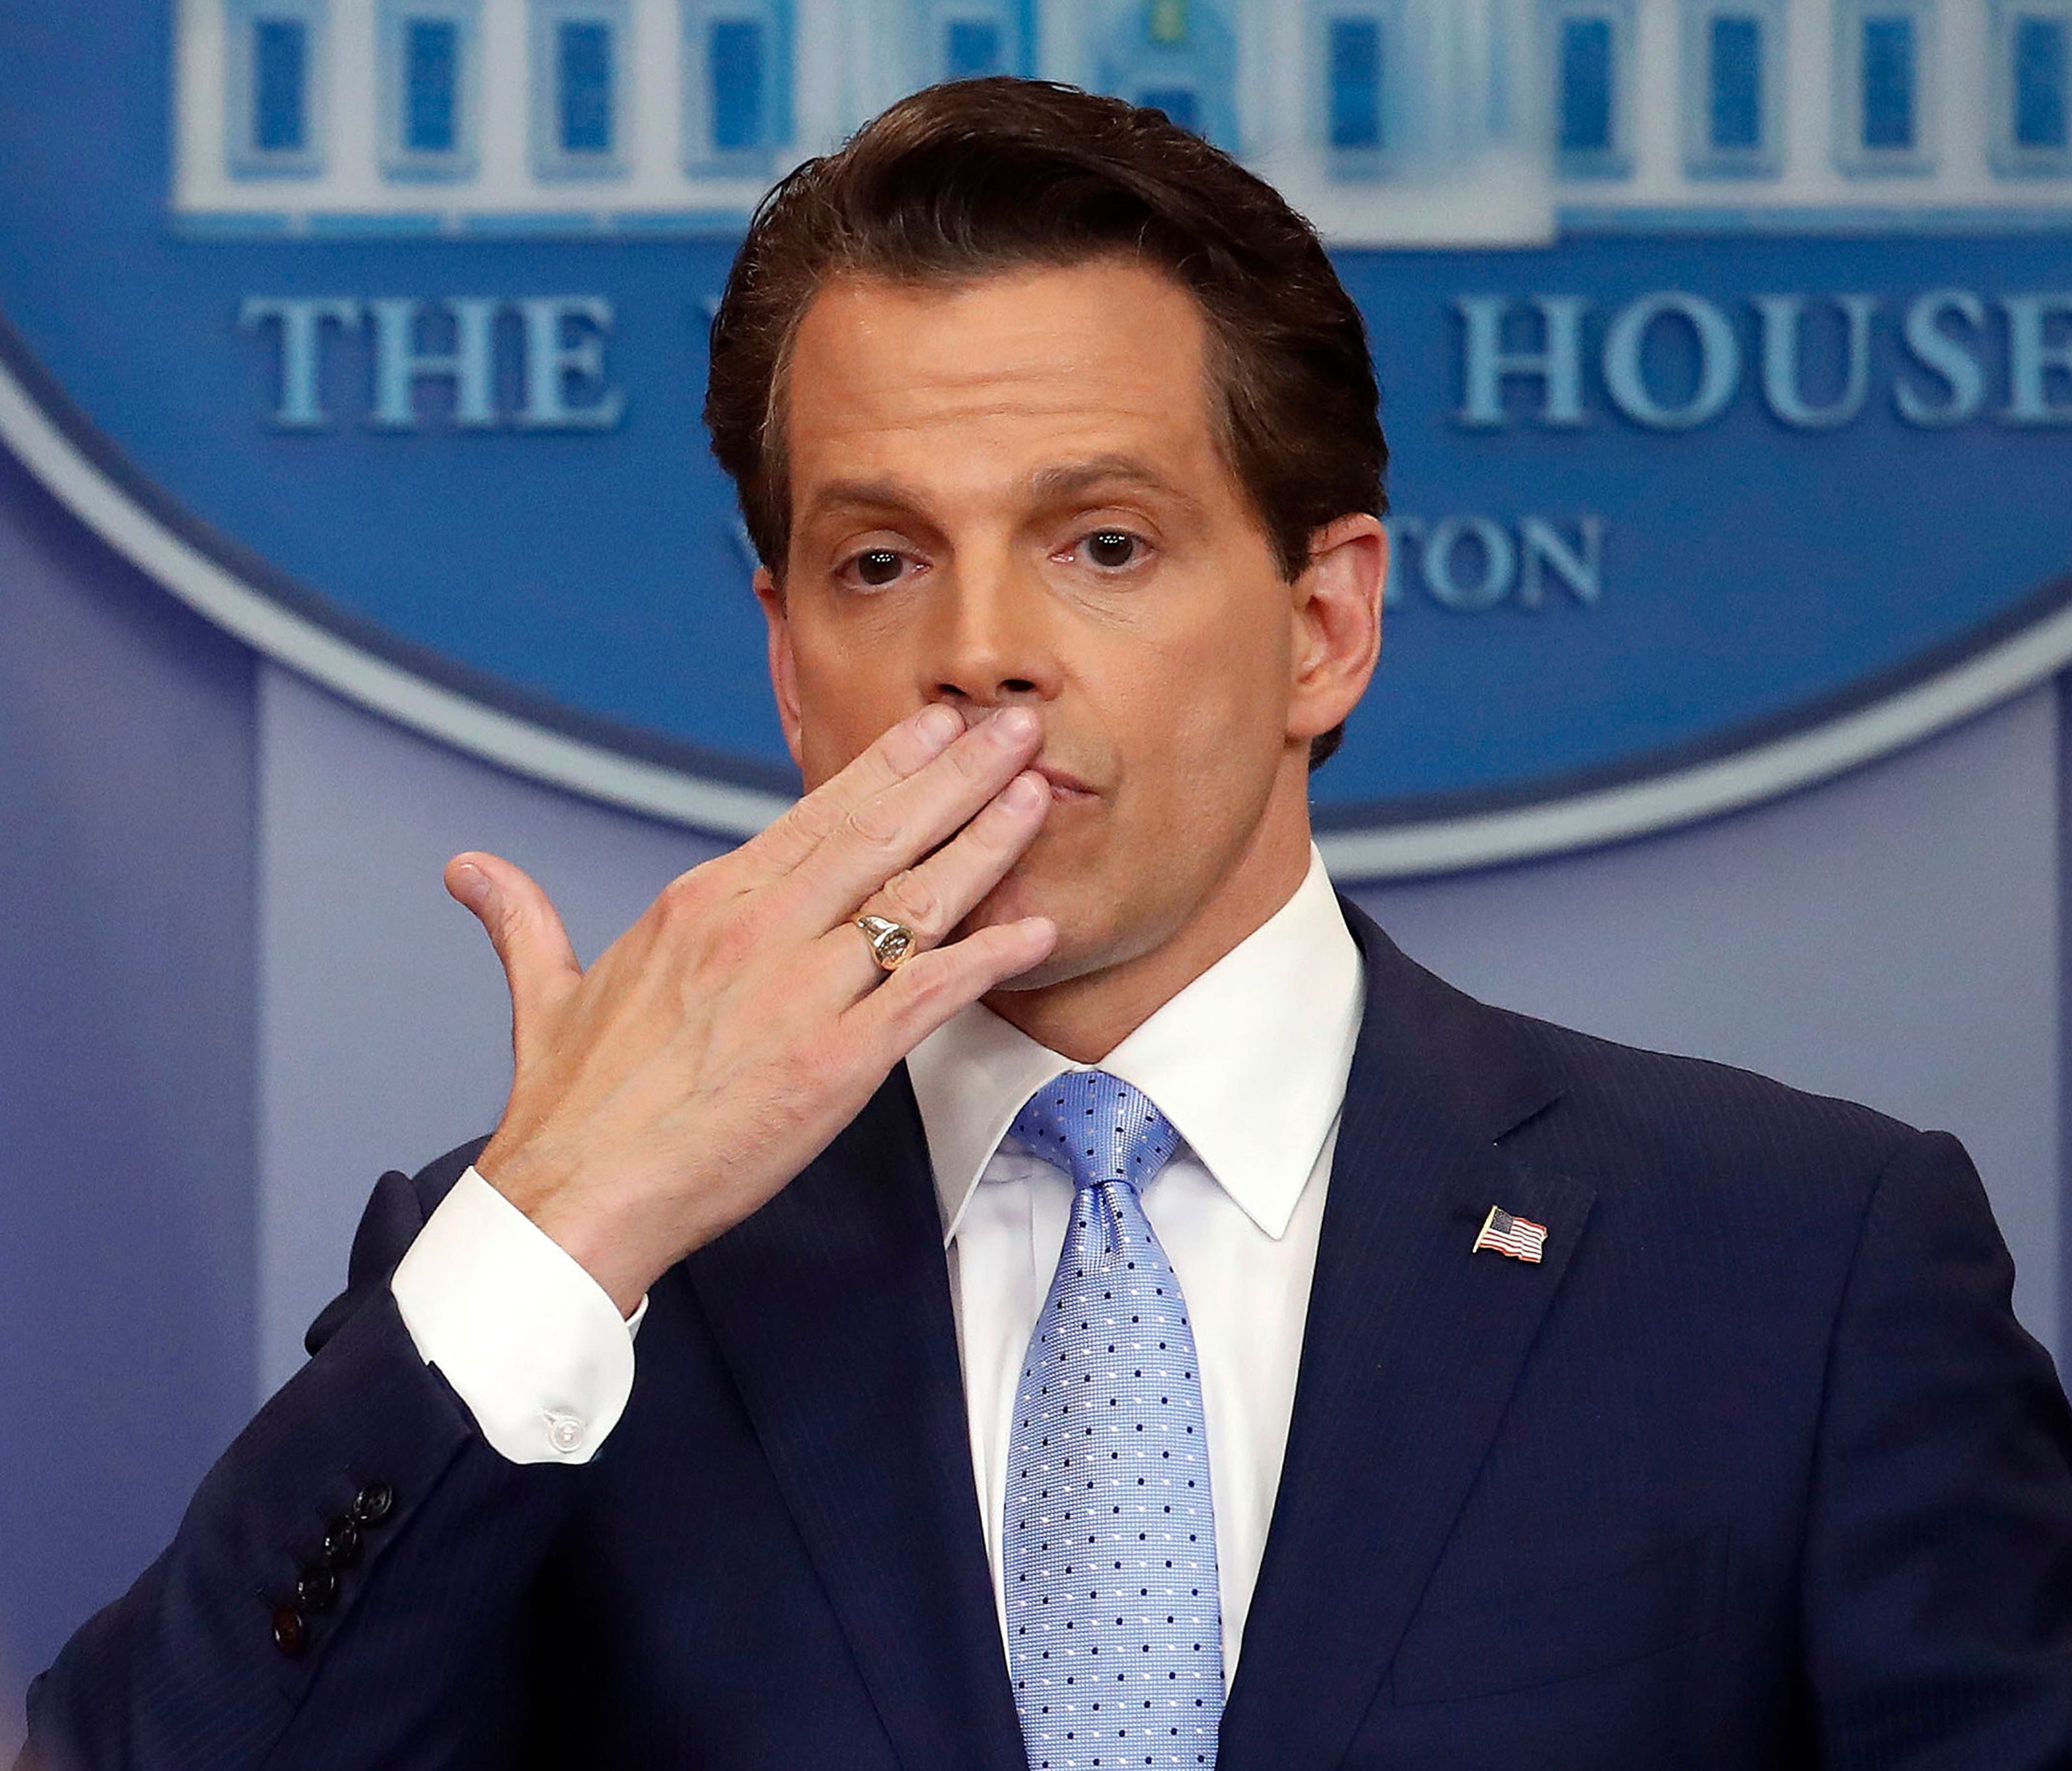 In this July 21, 2017 photo, incoming White House communications director Anthony Scaramucci, blowis a kiss after answering questions during the press briefing in the Brady Press Briefing room of the White House in Washington.